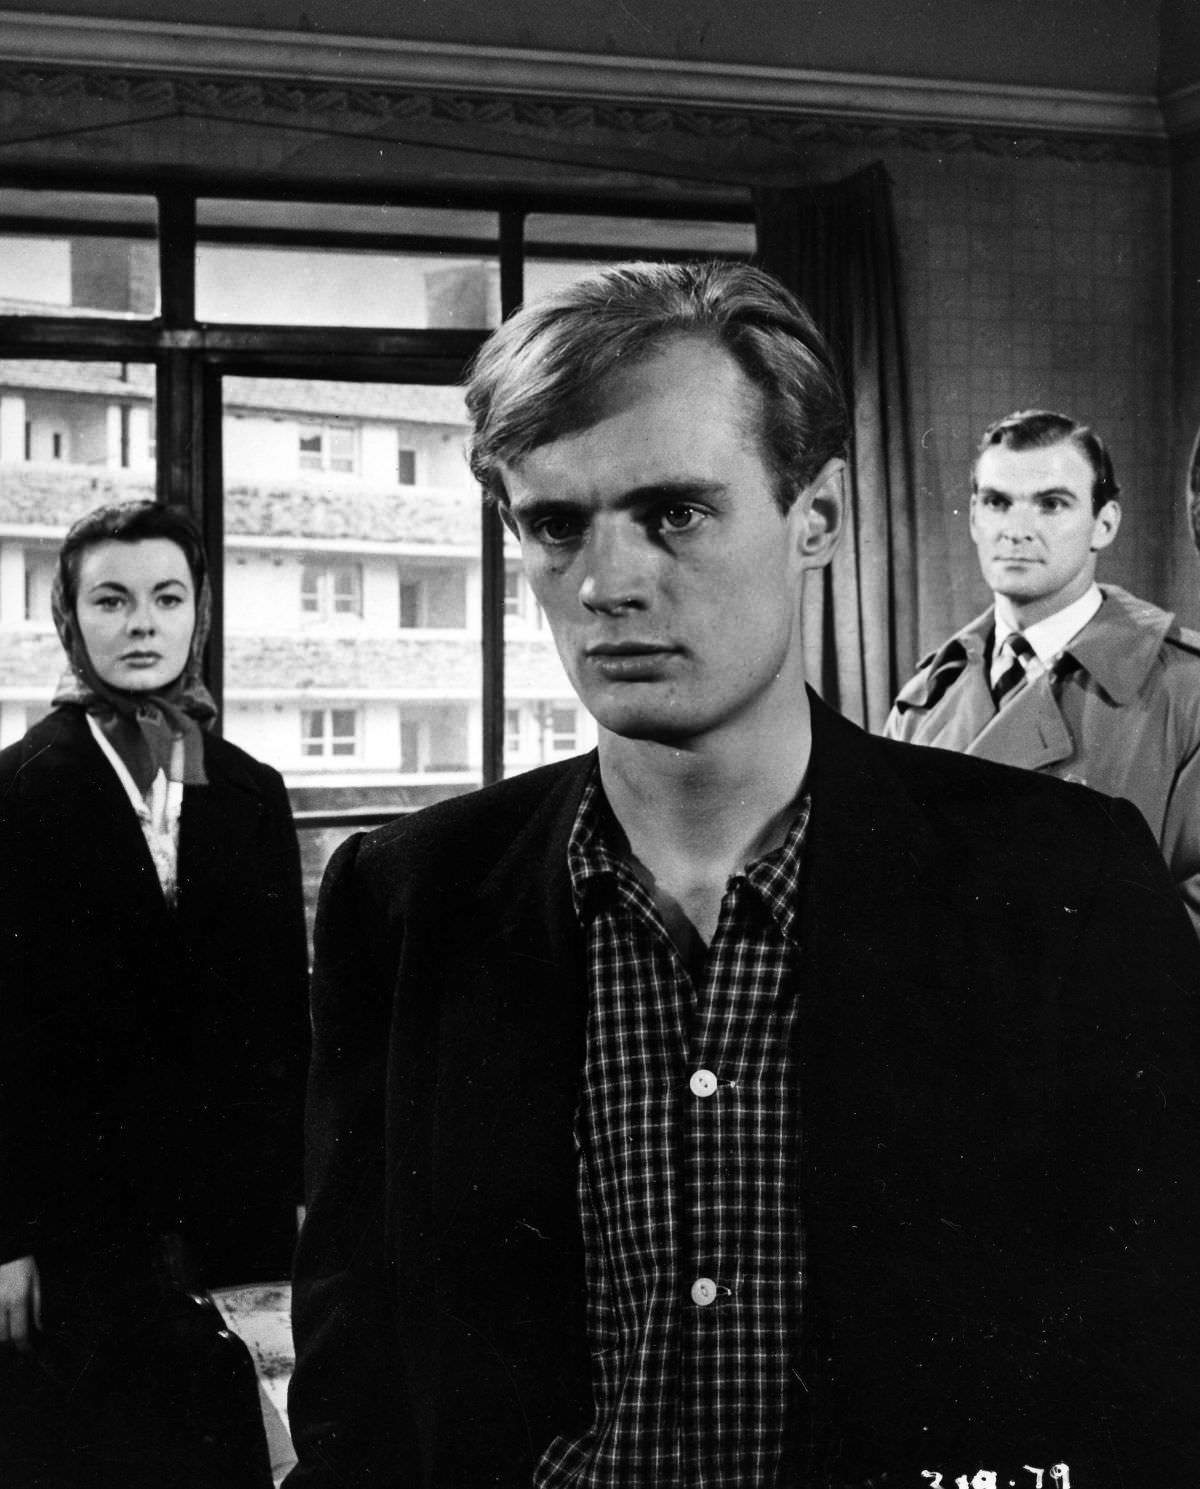 Anne Heywood as Catherine ‘Cathie’ Murphy, Stanley Baker as Detective-Sergeant Truman, and David McCallum as Johnnie Murphy.